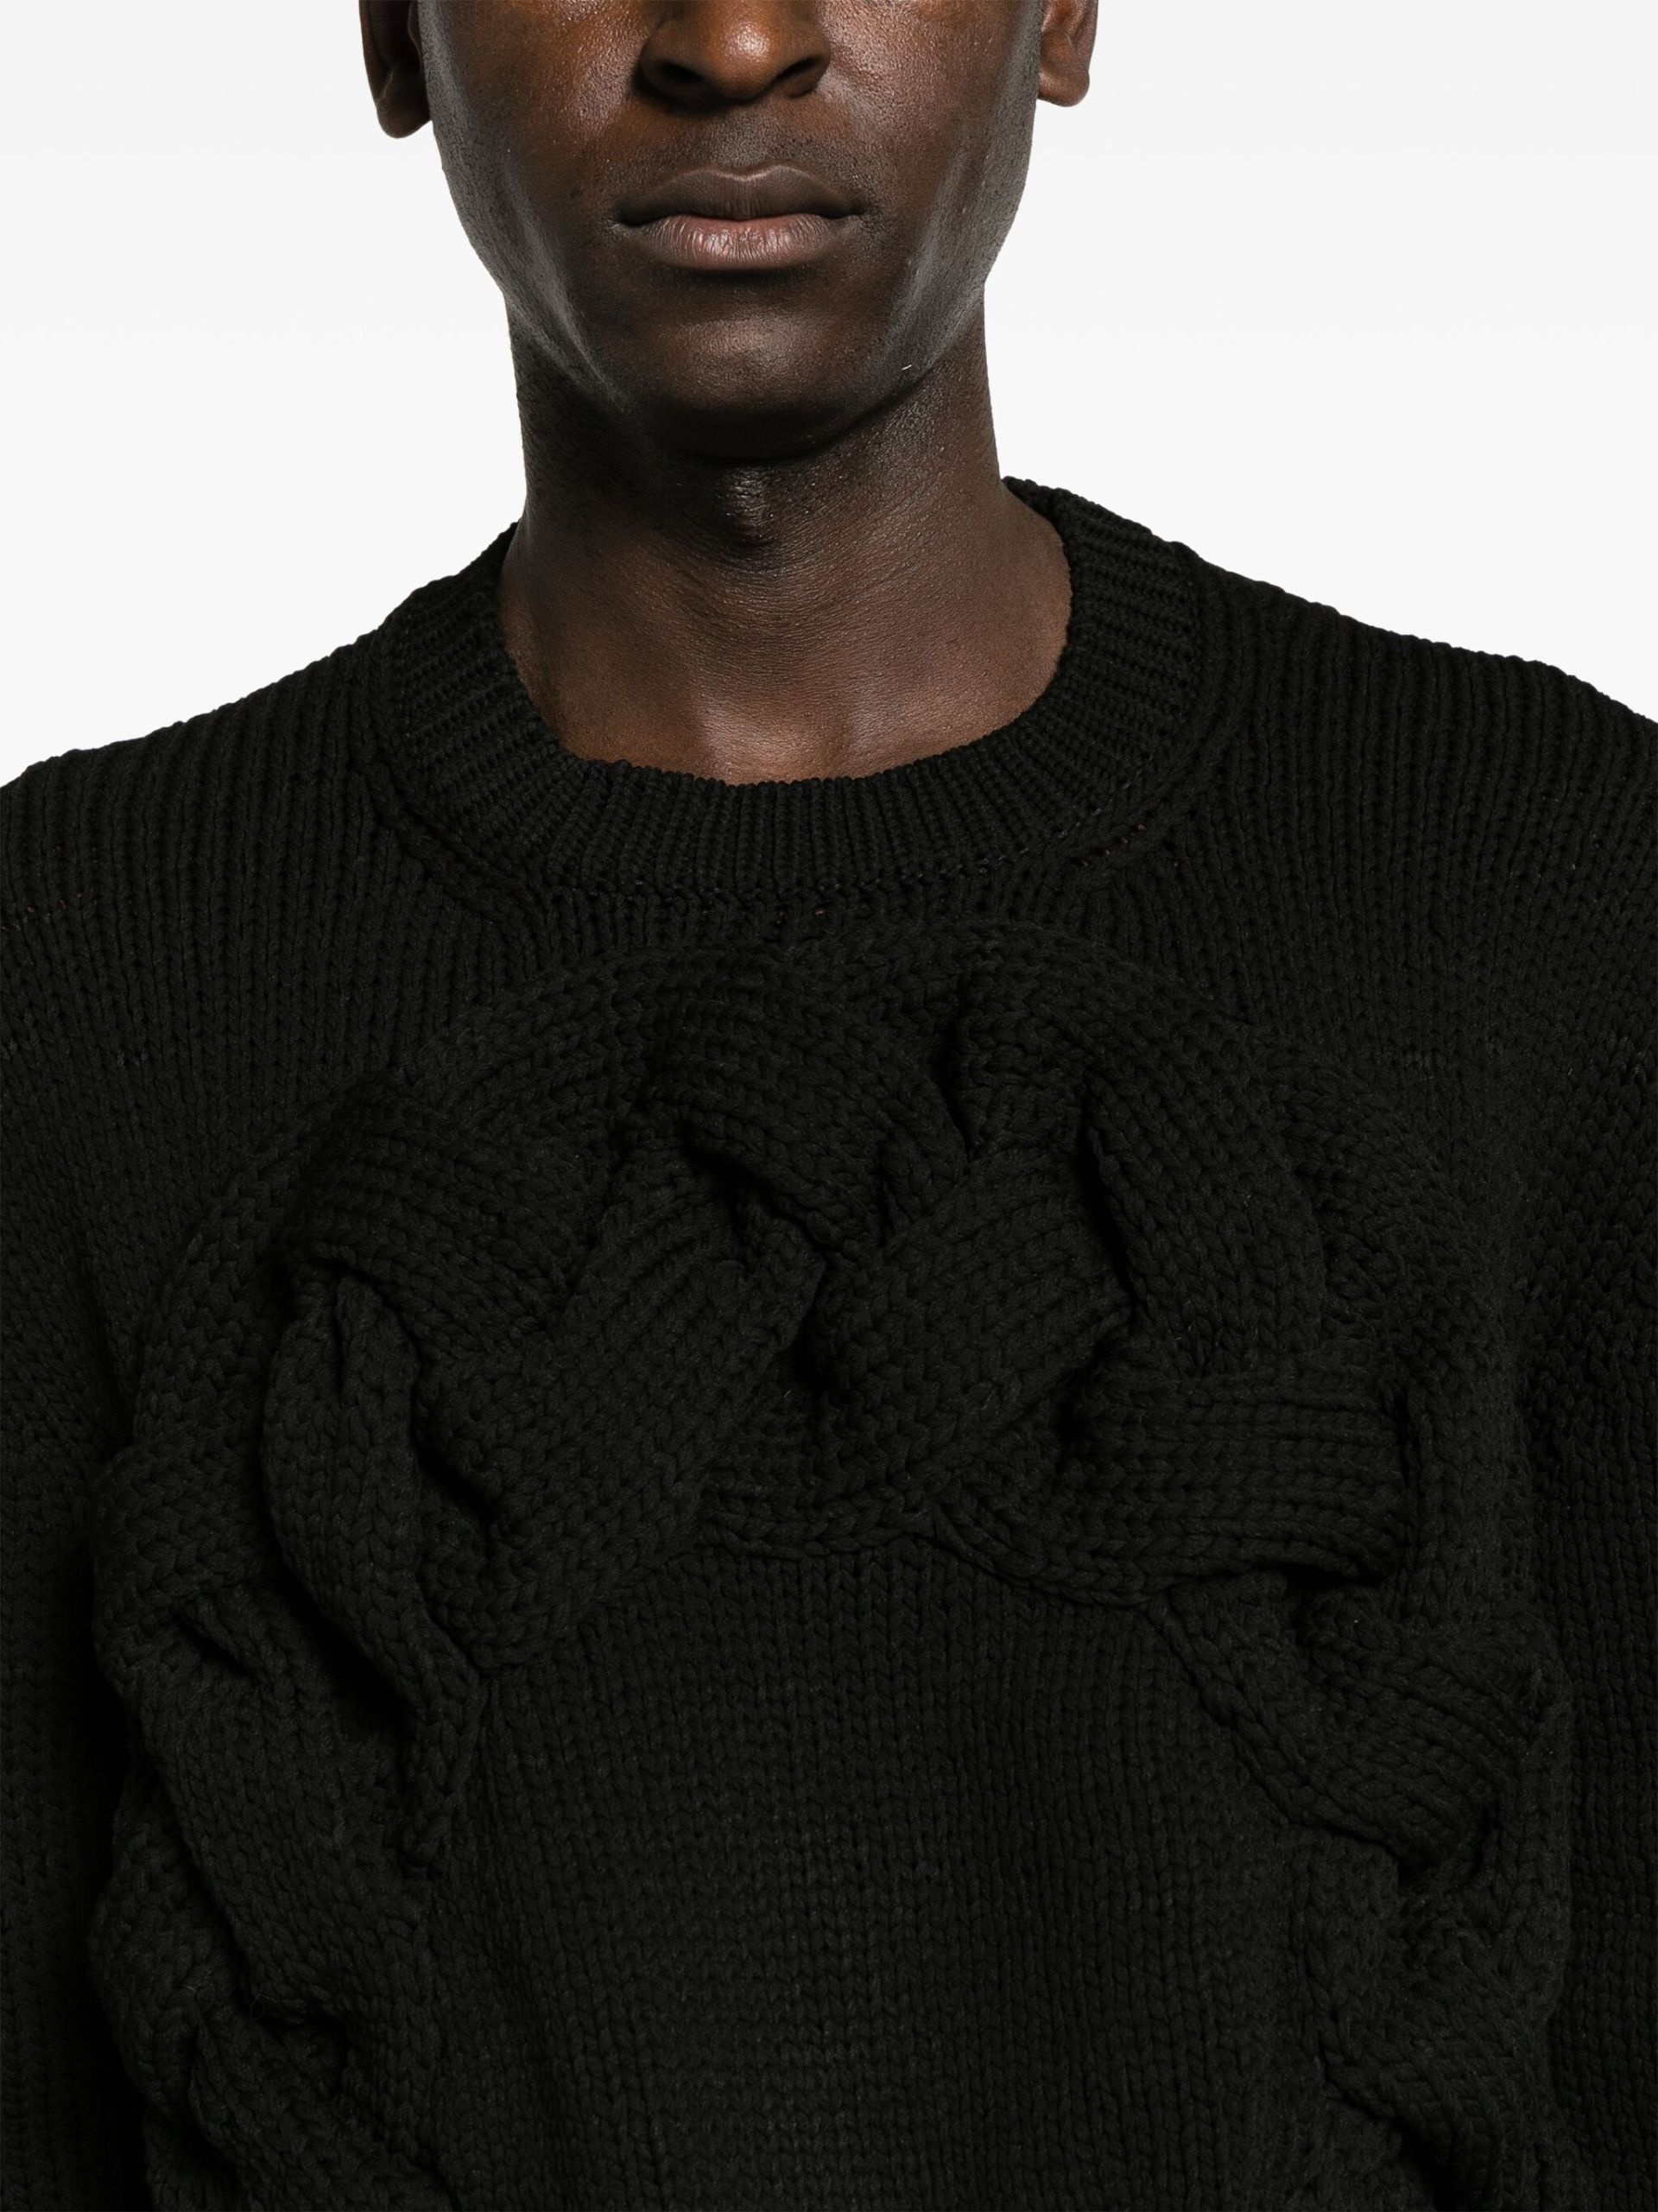 Black Cable-Knit Crew-Neck Sweater - 5